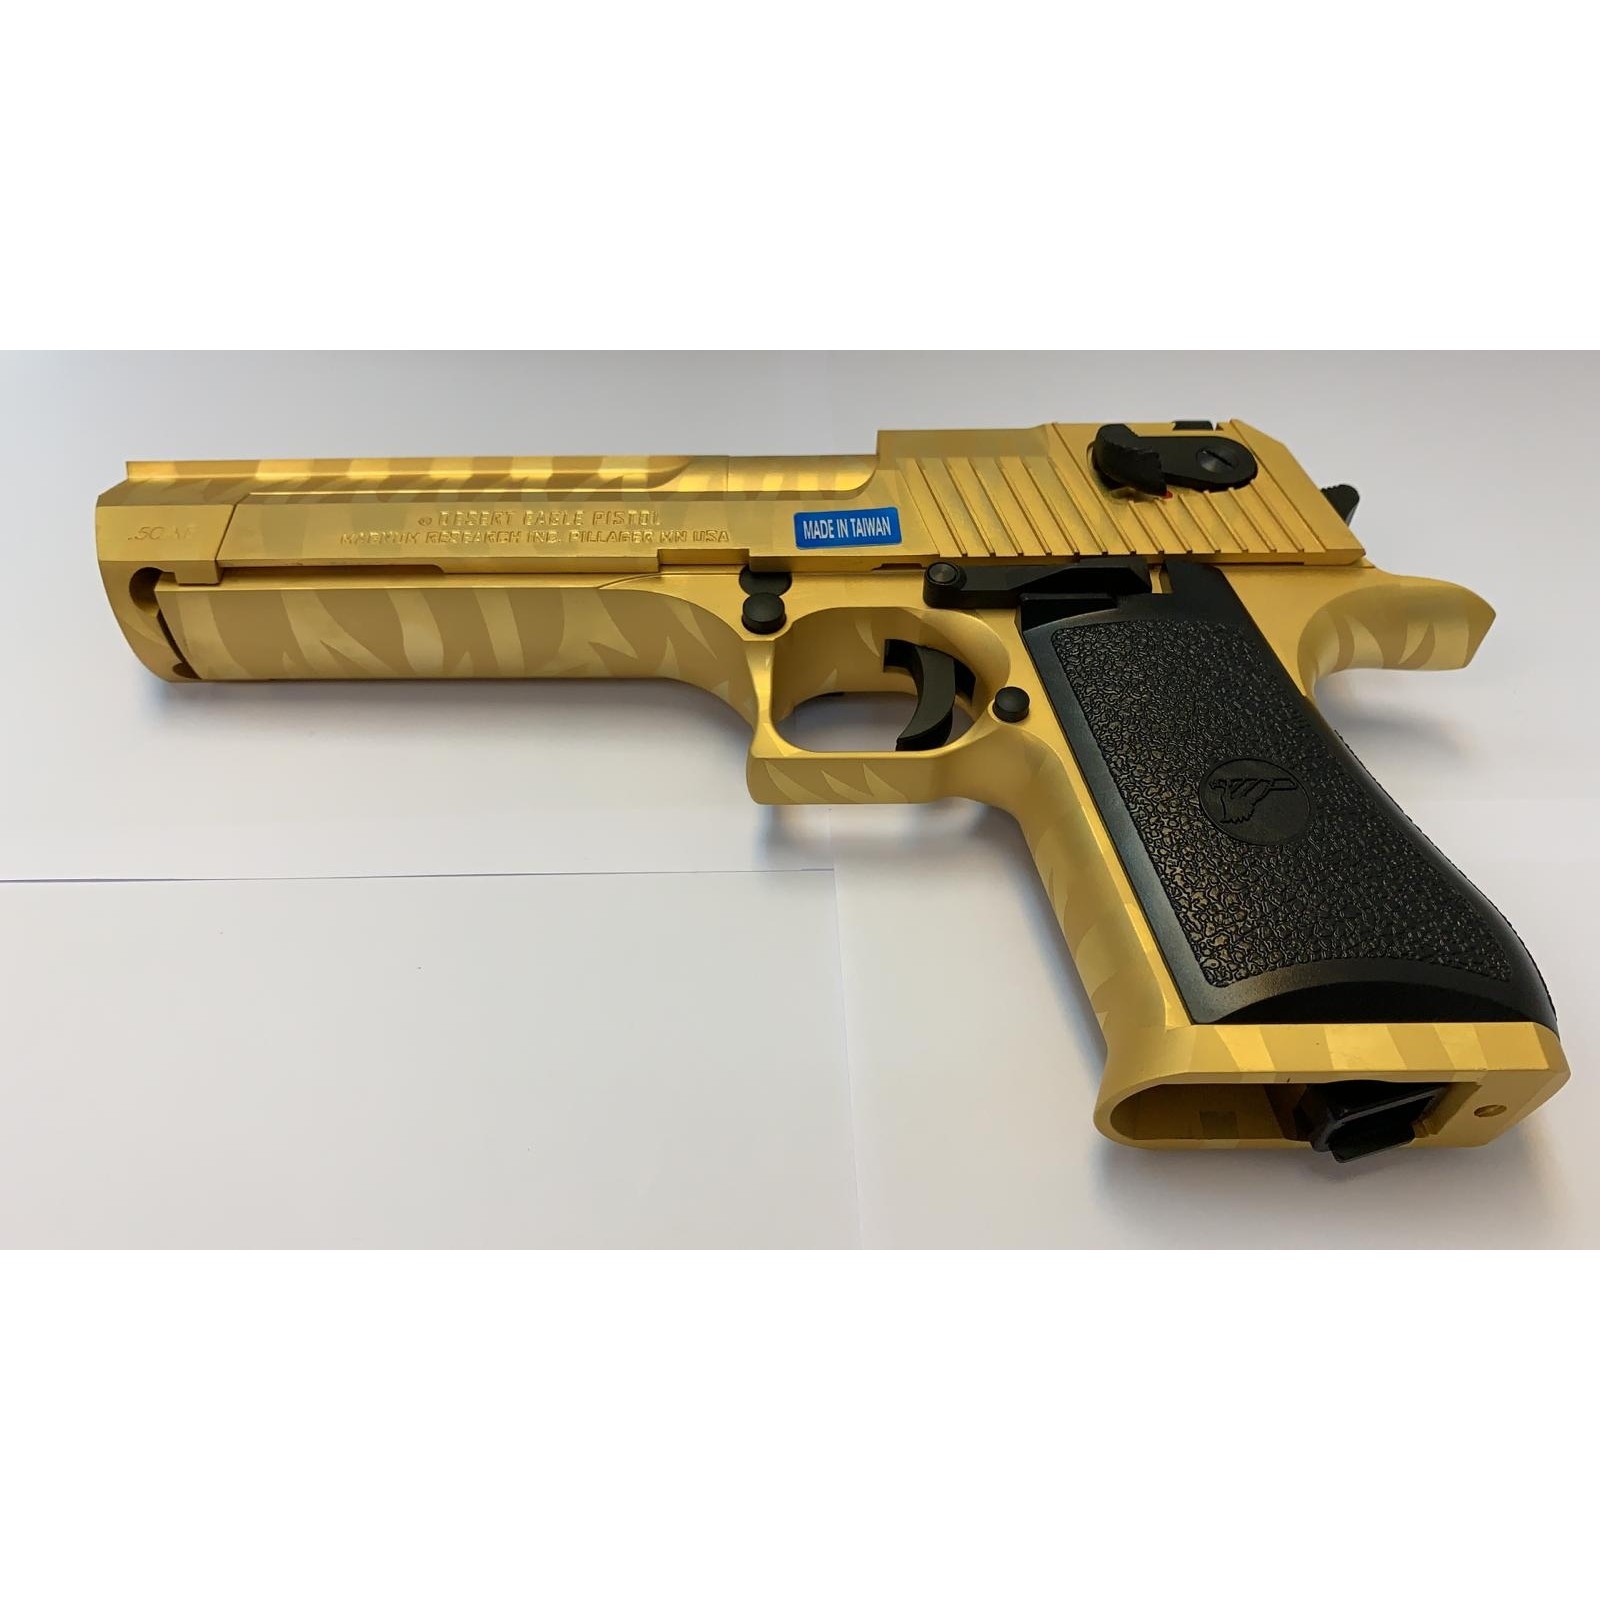 We Tech Desert Eagle 50 Ae Full Metal Gas Blowback Airsoft Pistol By Cyberg...